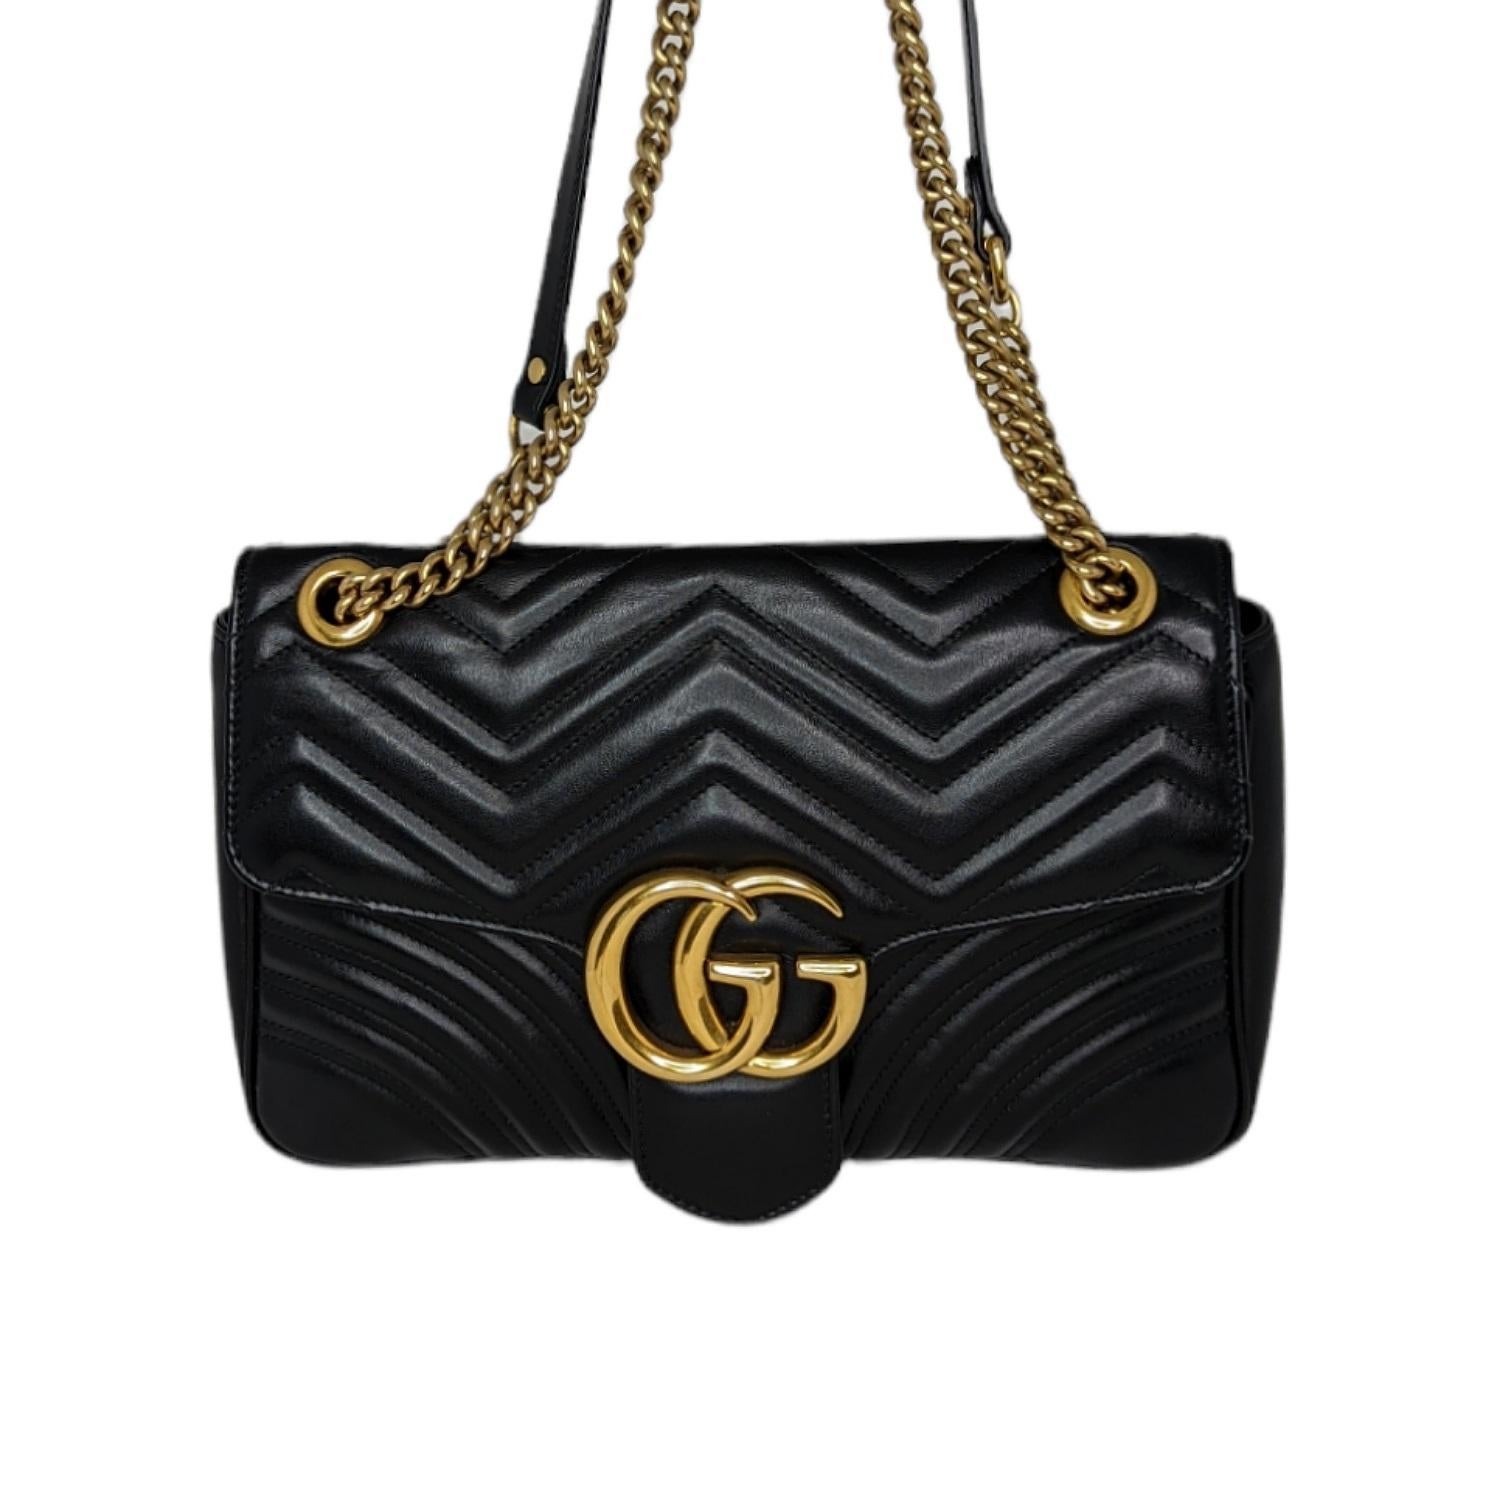 The medium GG Marmont chain shoulder bag has a softly structured shape and an oversized flap closure with Double G hardware. The sliding chain strap can be worn multiple ways, changing between a shoulder and a top handle bag. Made in matelassé